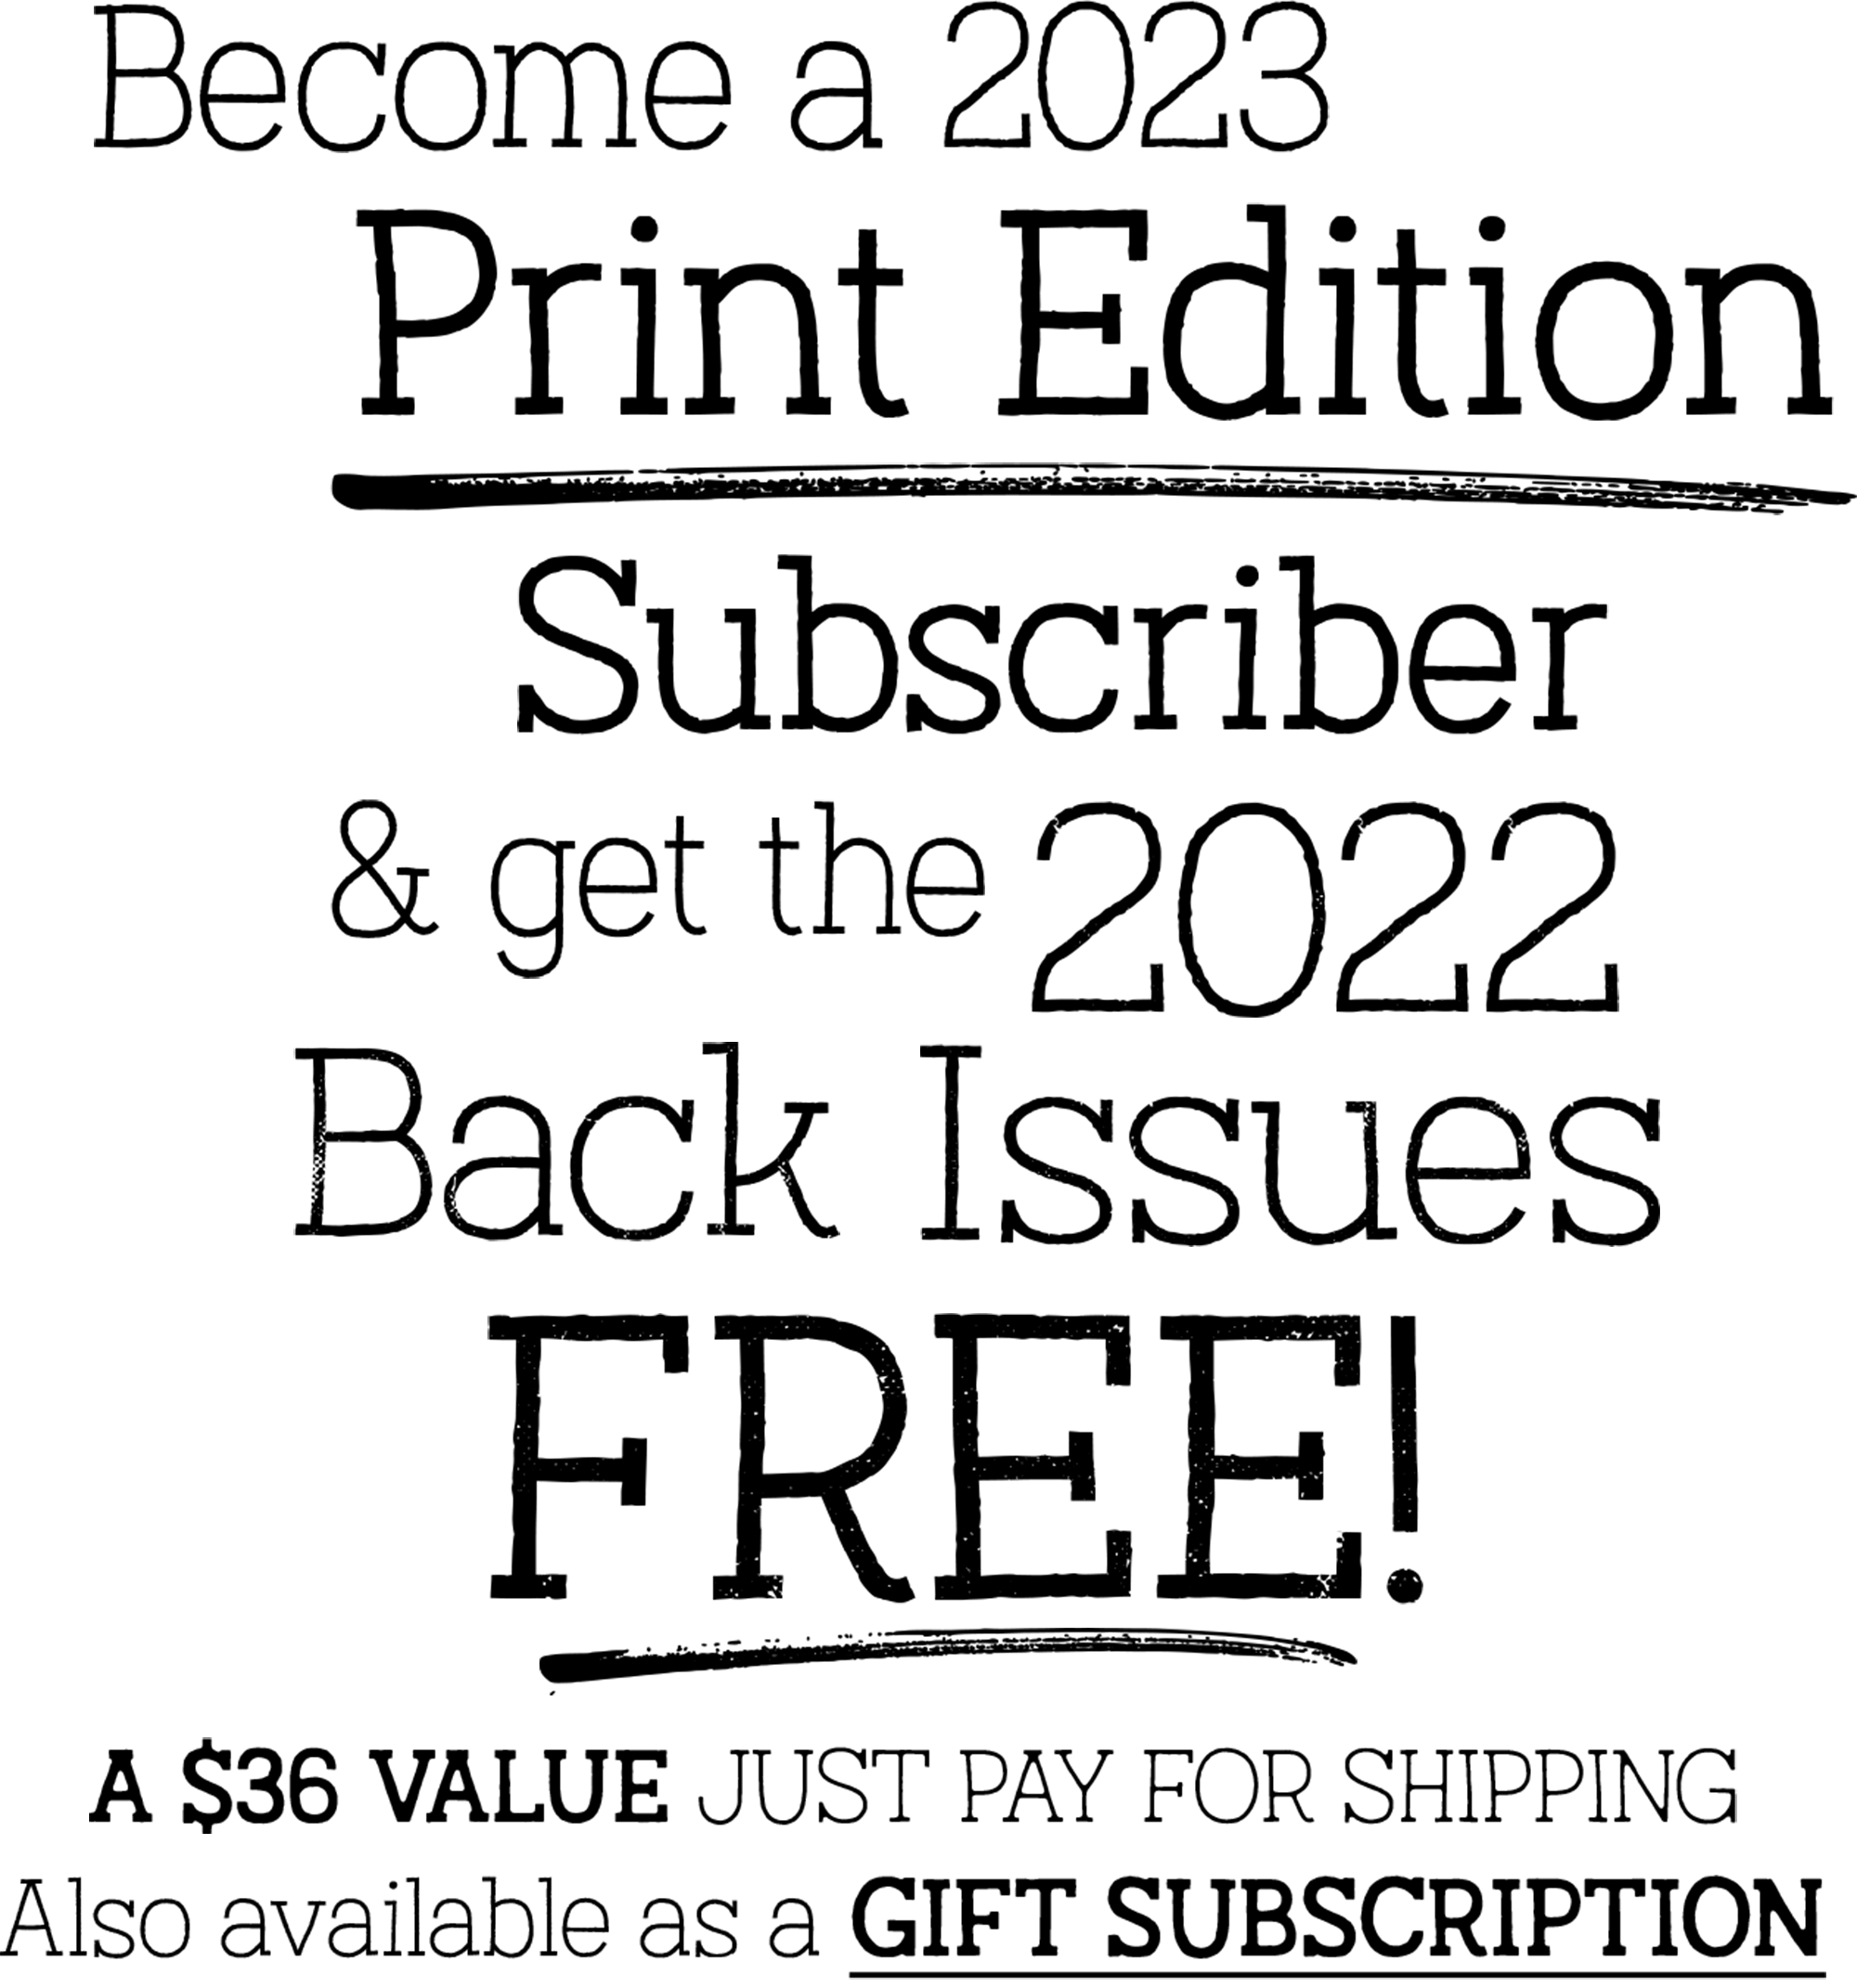 Become a 2023 Print Edition Subscriber & get the 2022 Back Issues FREE! typography